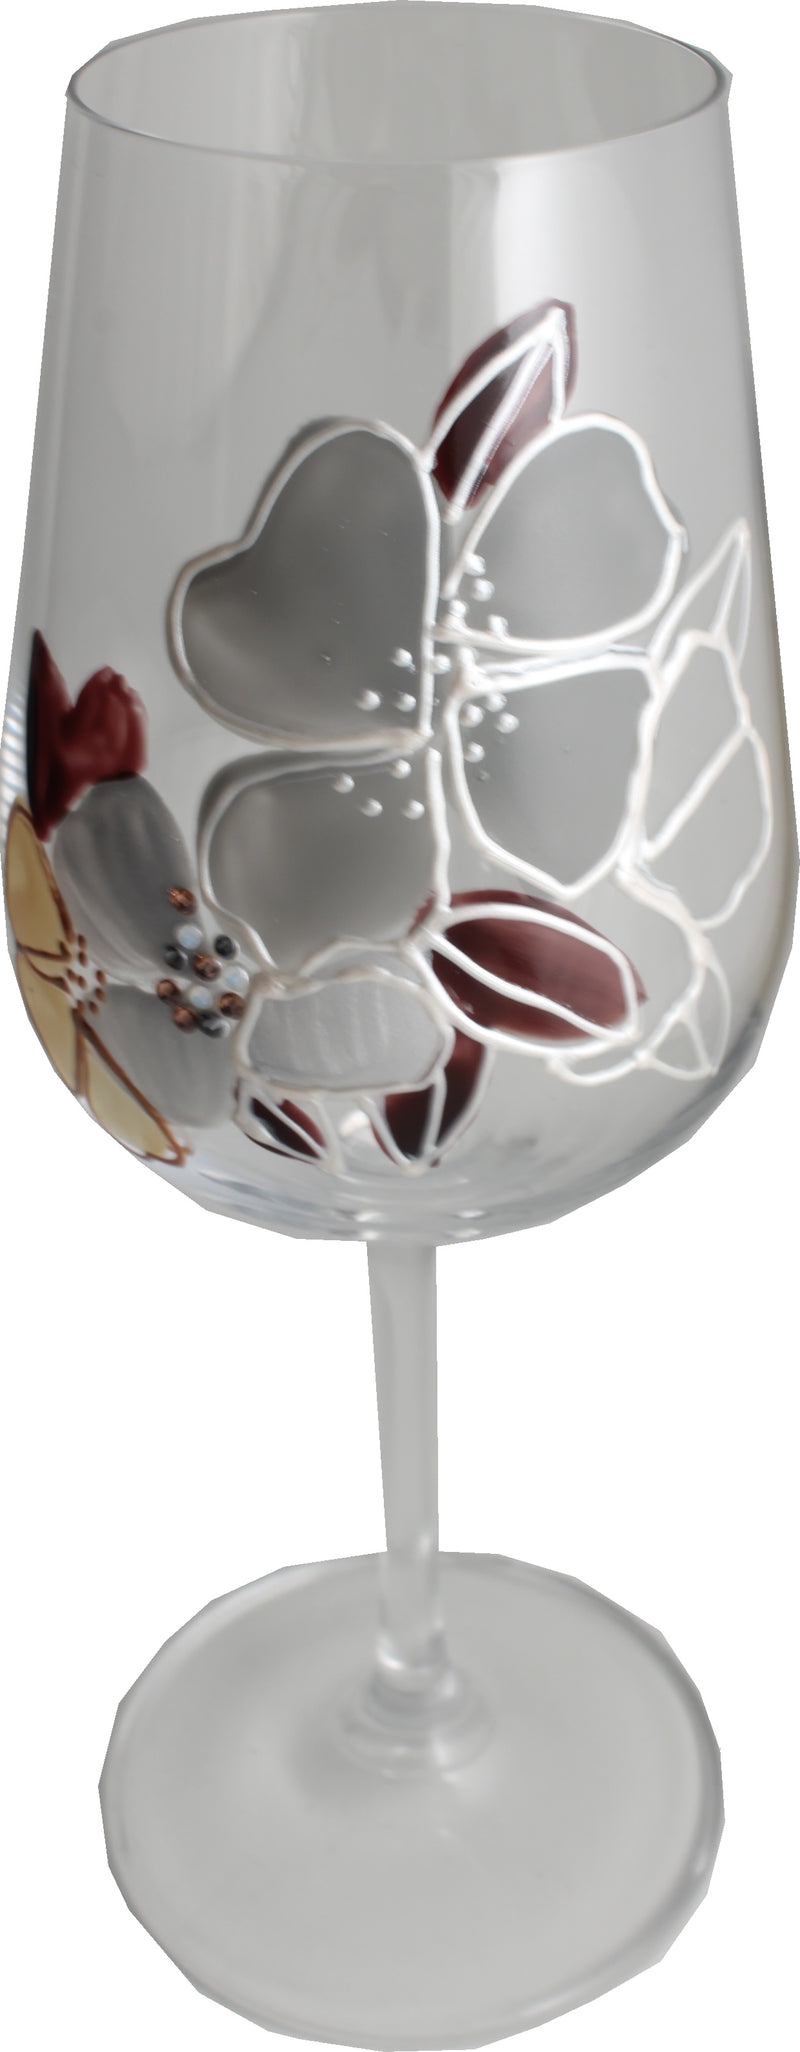 Wine Glass With Titanium Crystal: Luxury with Crystals